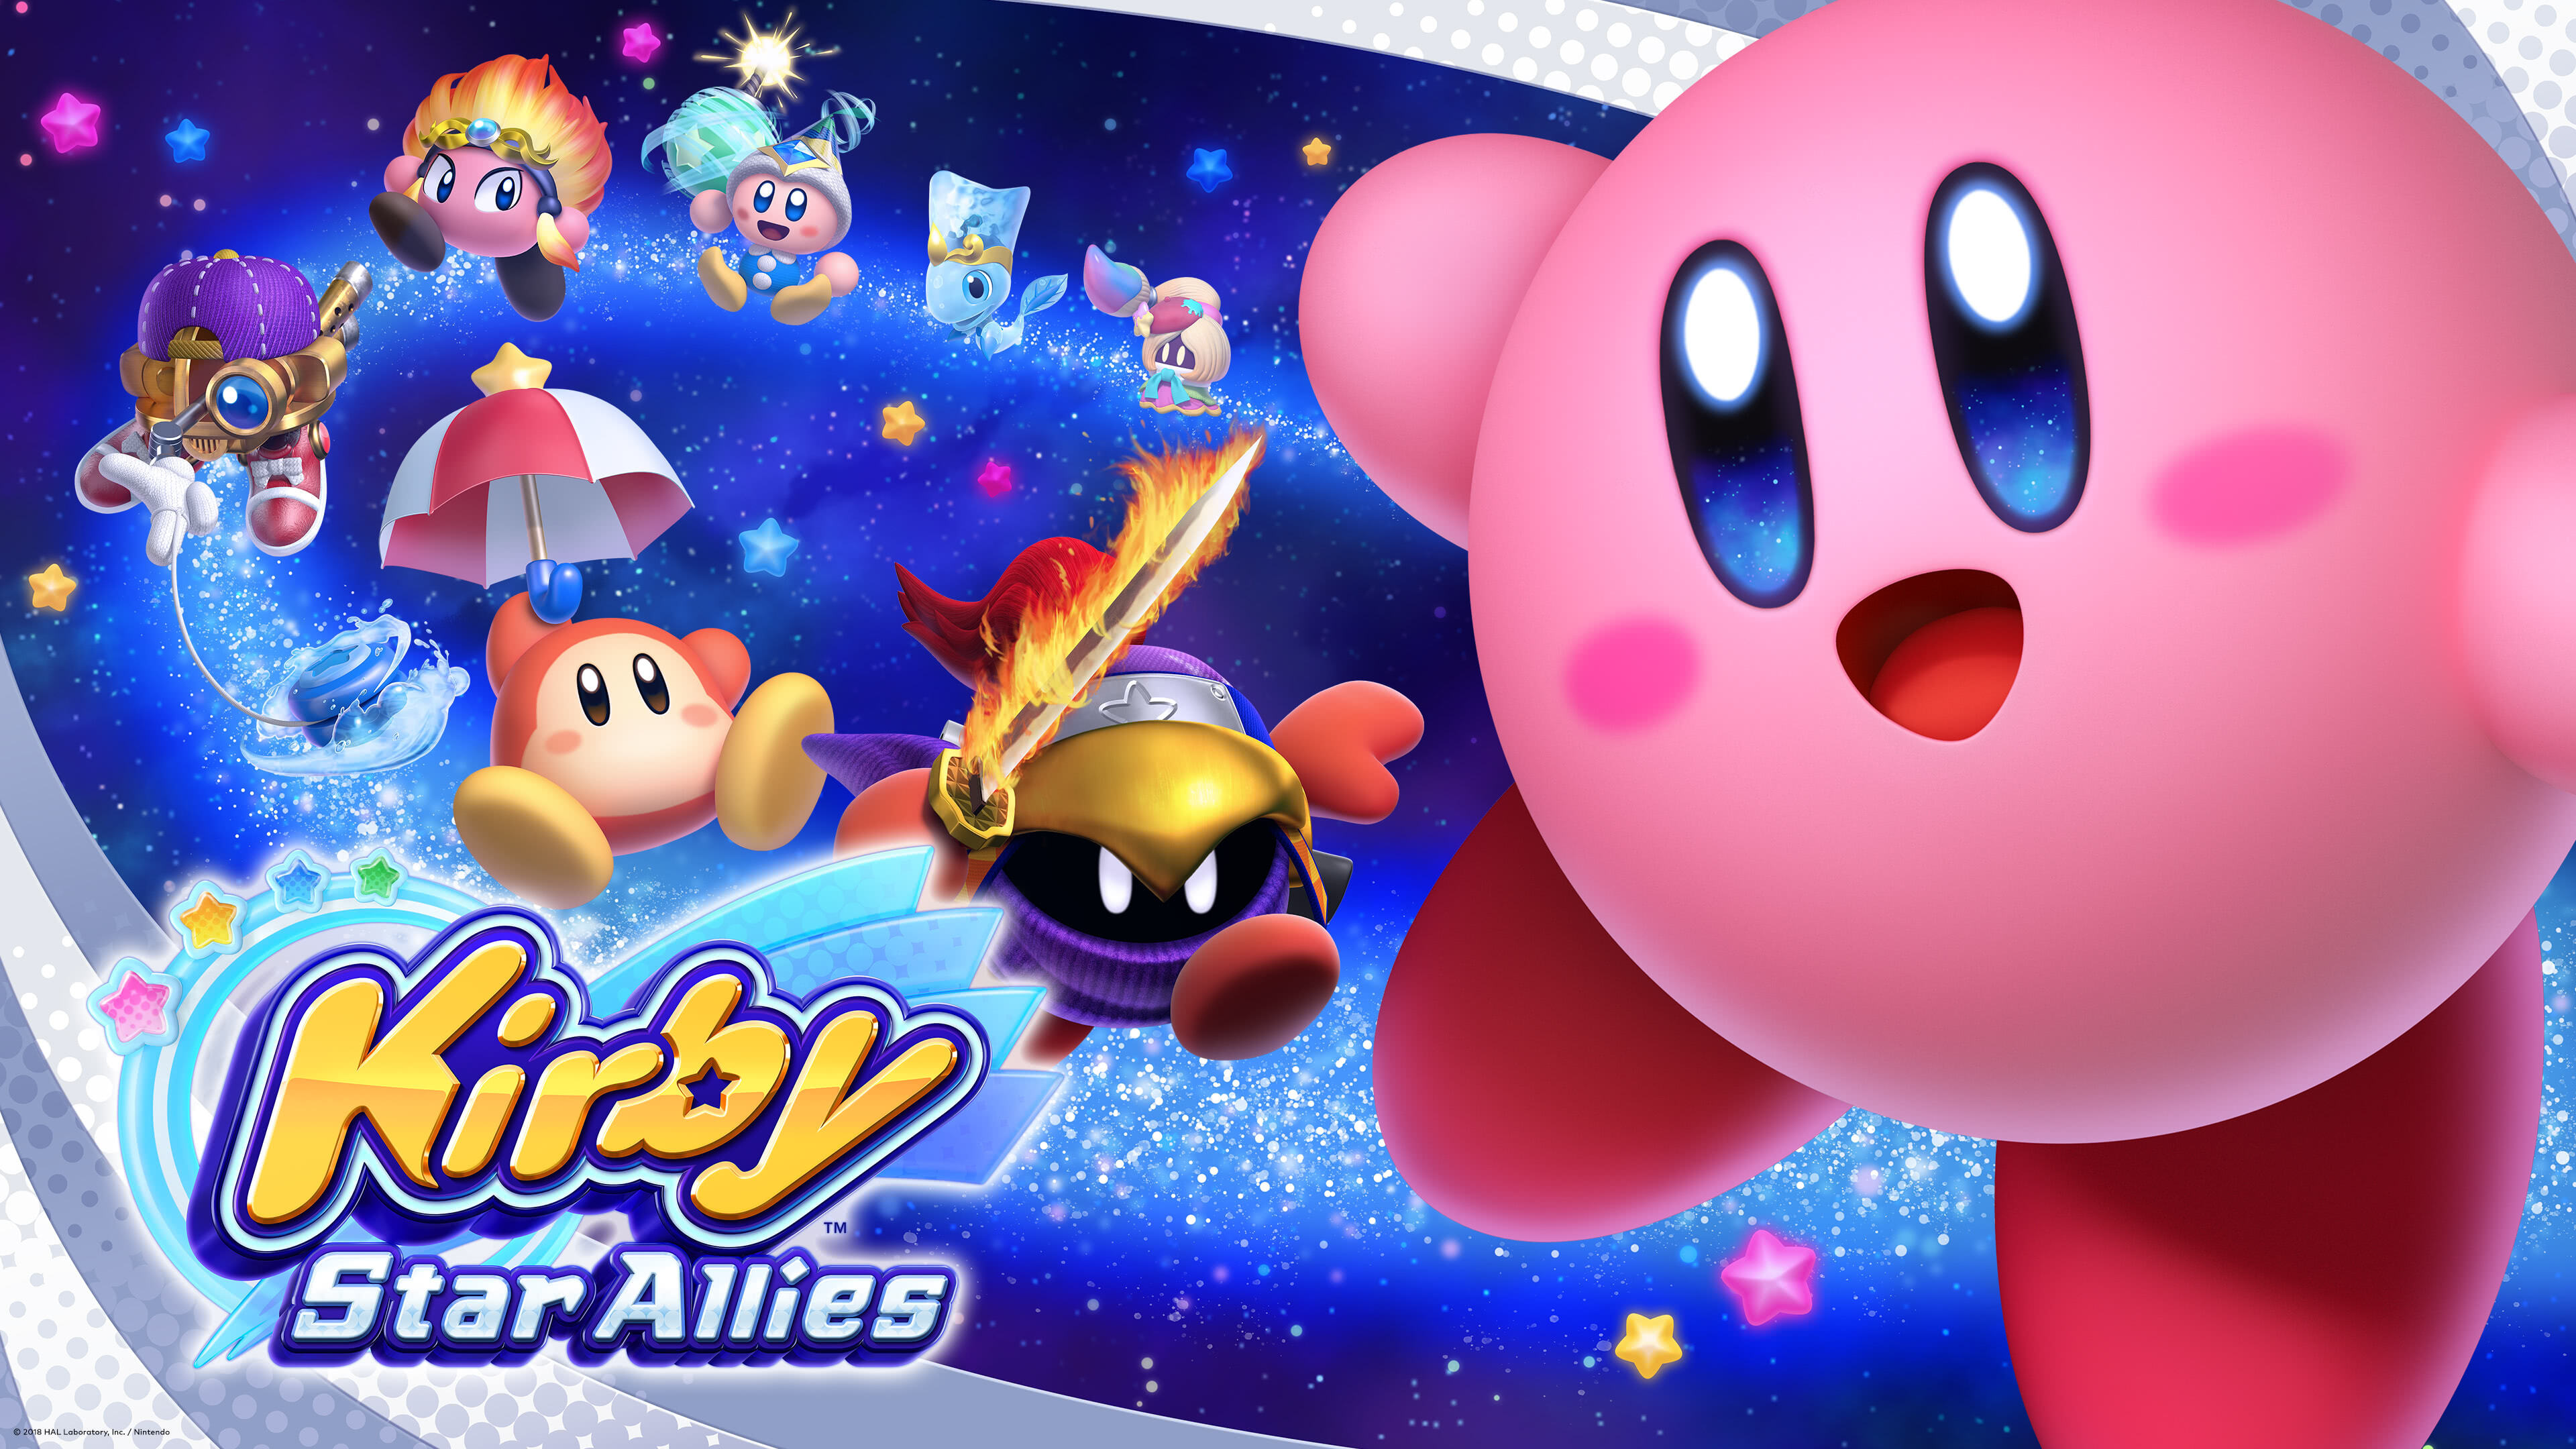 Kirby 2ds 3ds game switchgame retro cutekirby galaxy cute ds HD  phone wallpaper  Peakpx